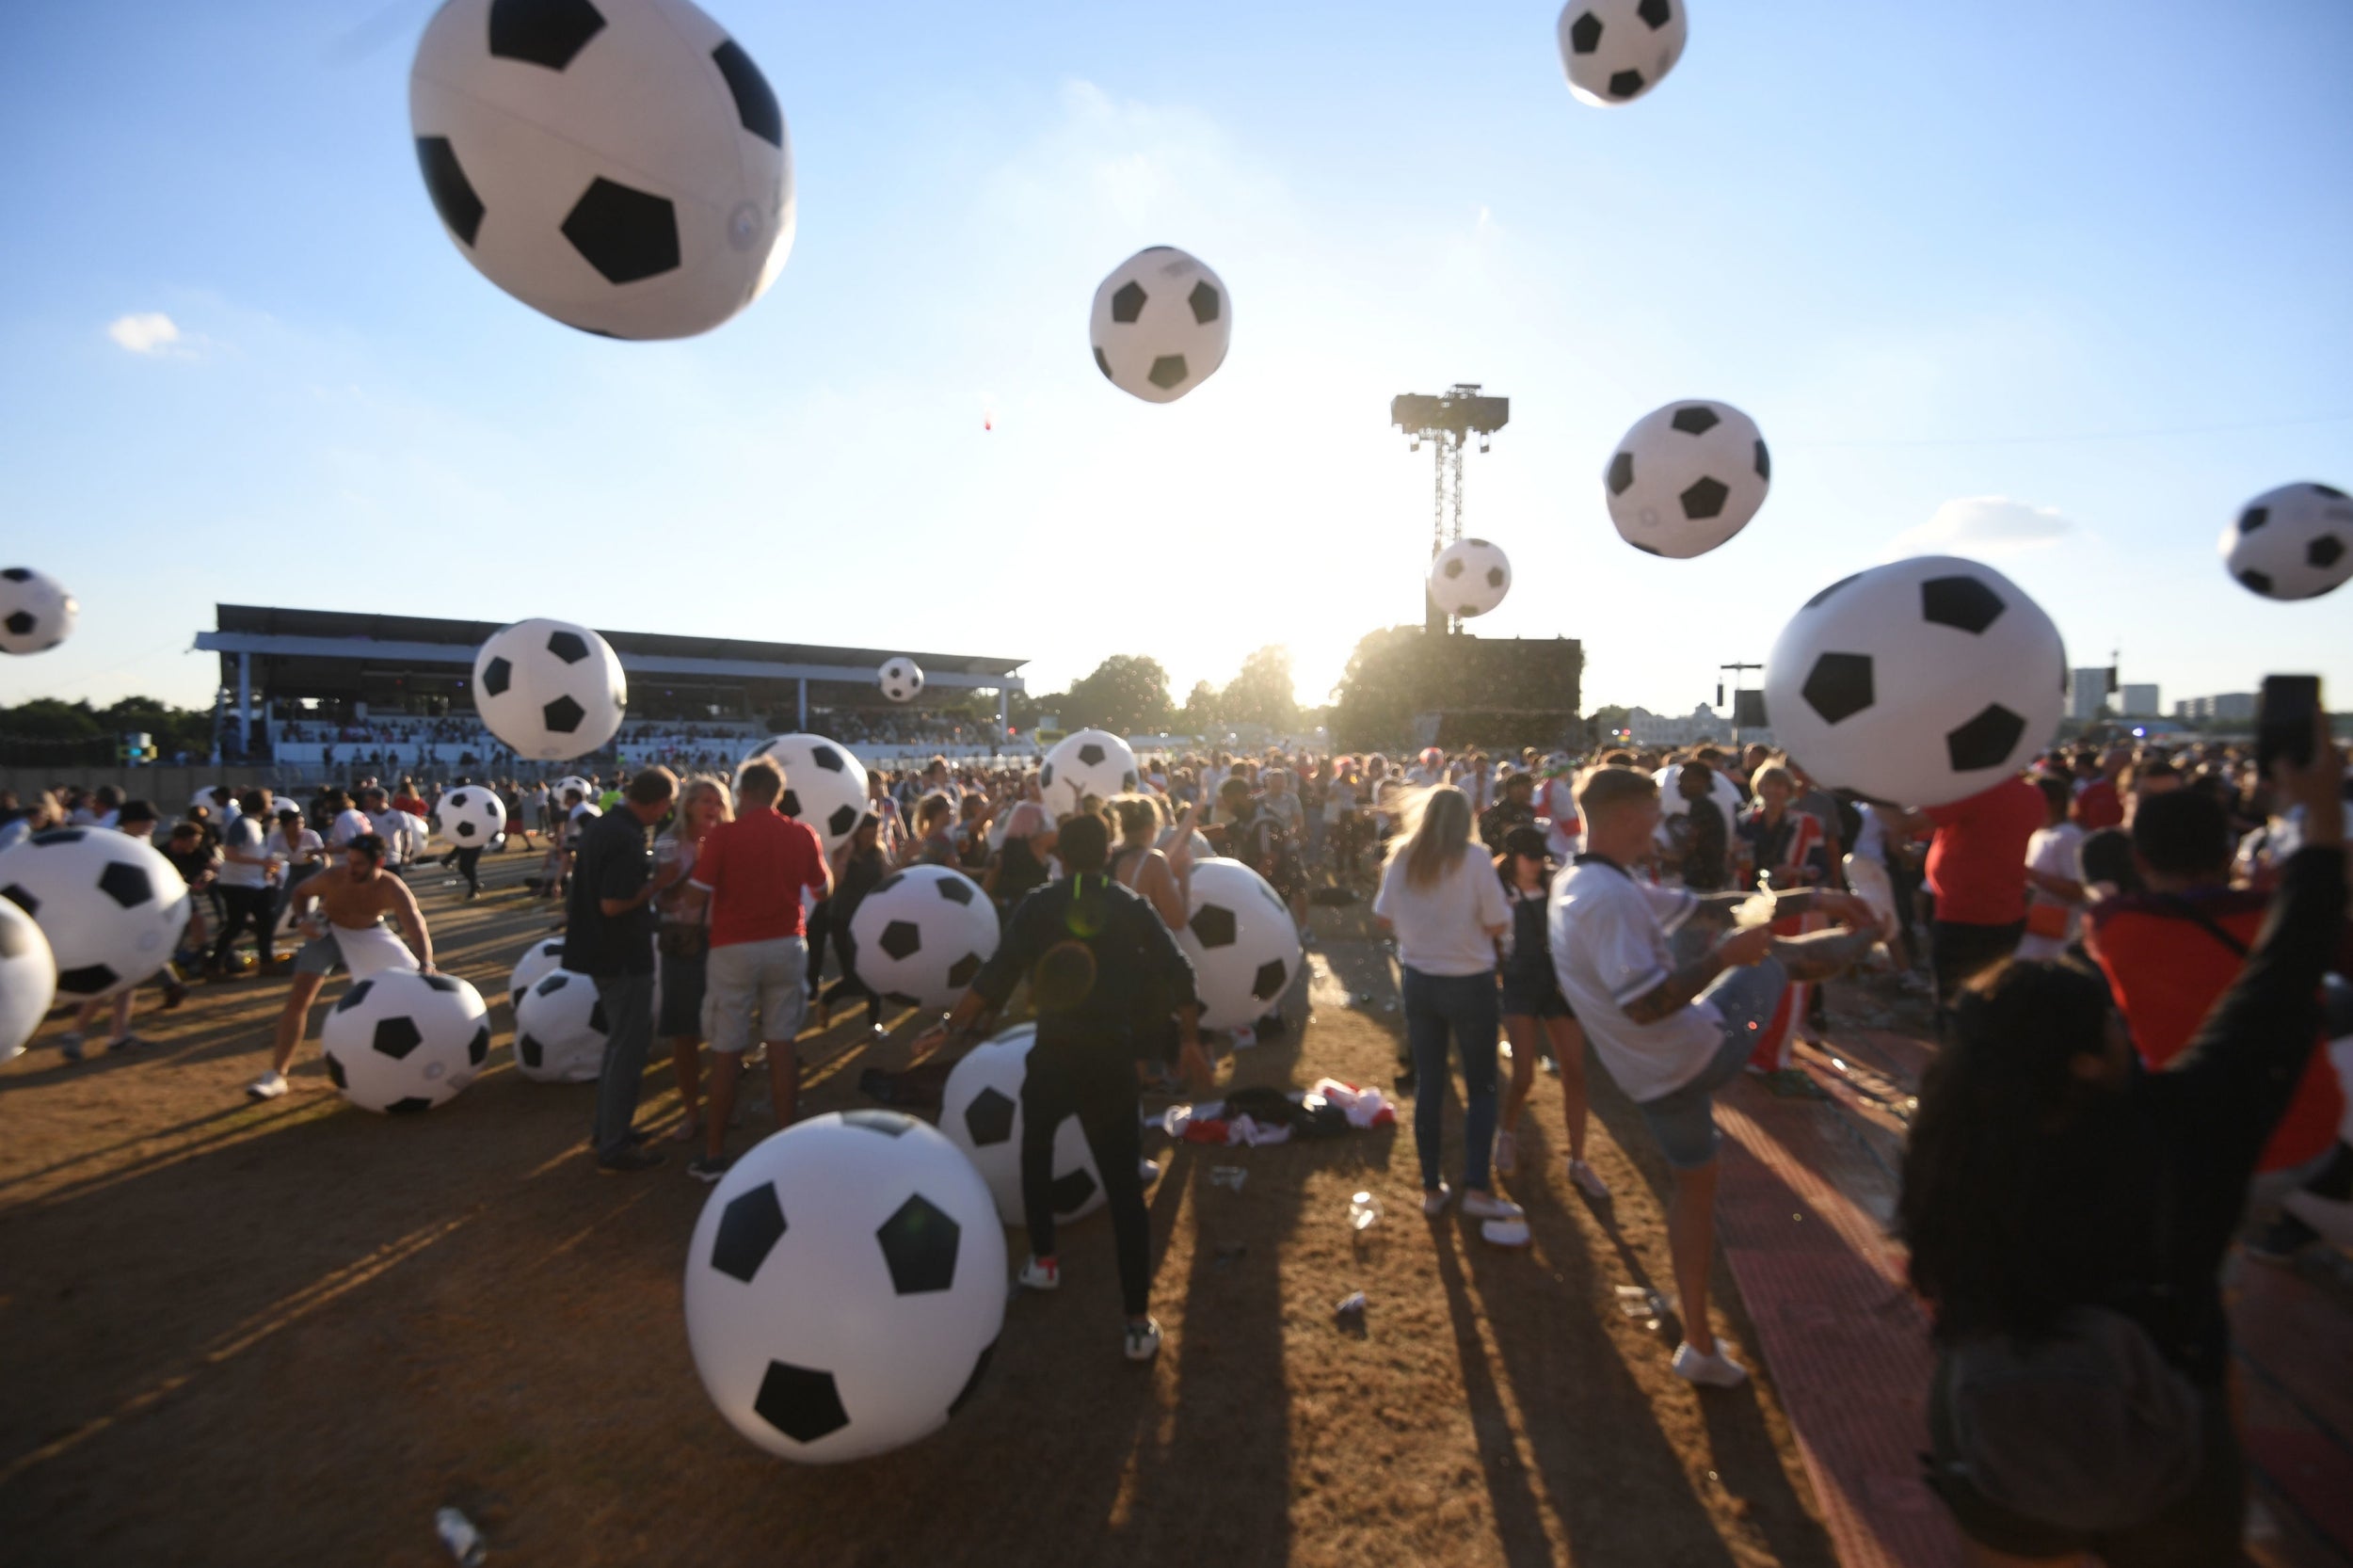 Giant footballs bounced among the fans in Hyde Park before kick-off